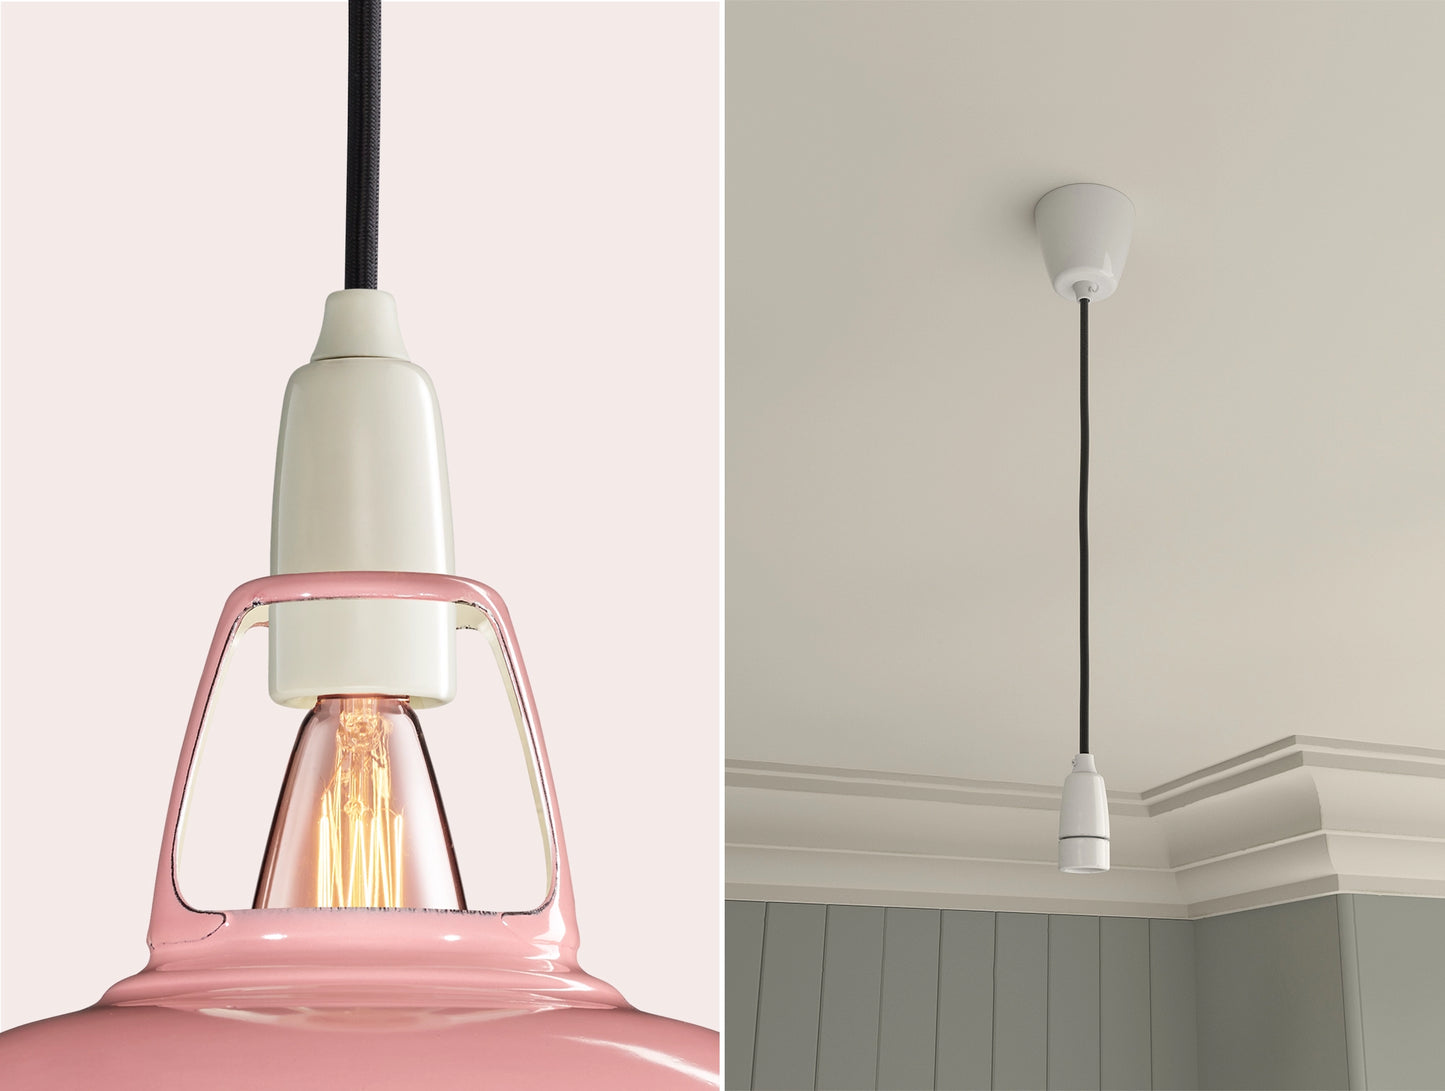 Close up of an E14 Porcelain suspension set on a Powder Pink lampshade on the left. On the right, an E14 Porcelain pendant set is hanging from the ceiling